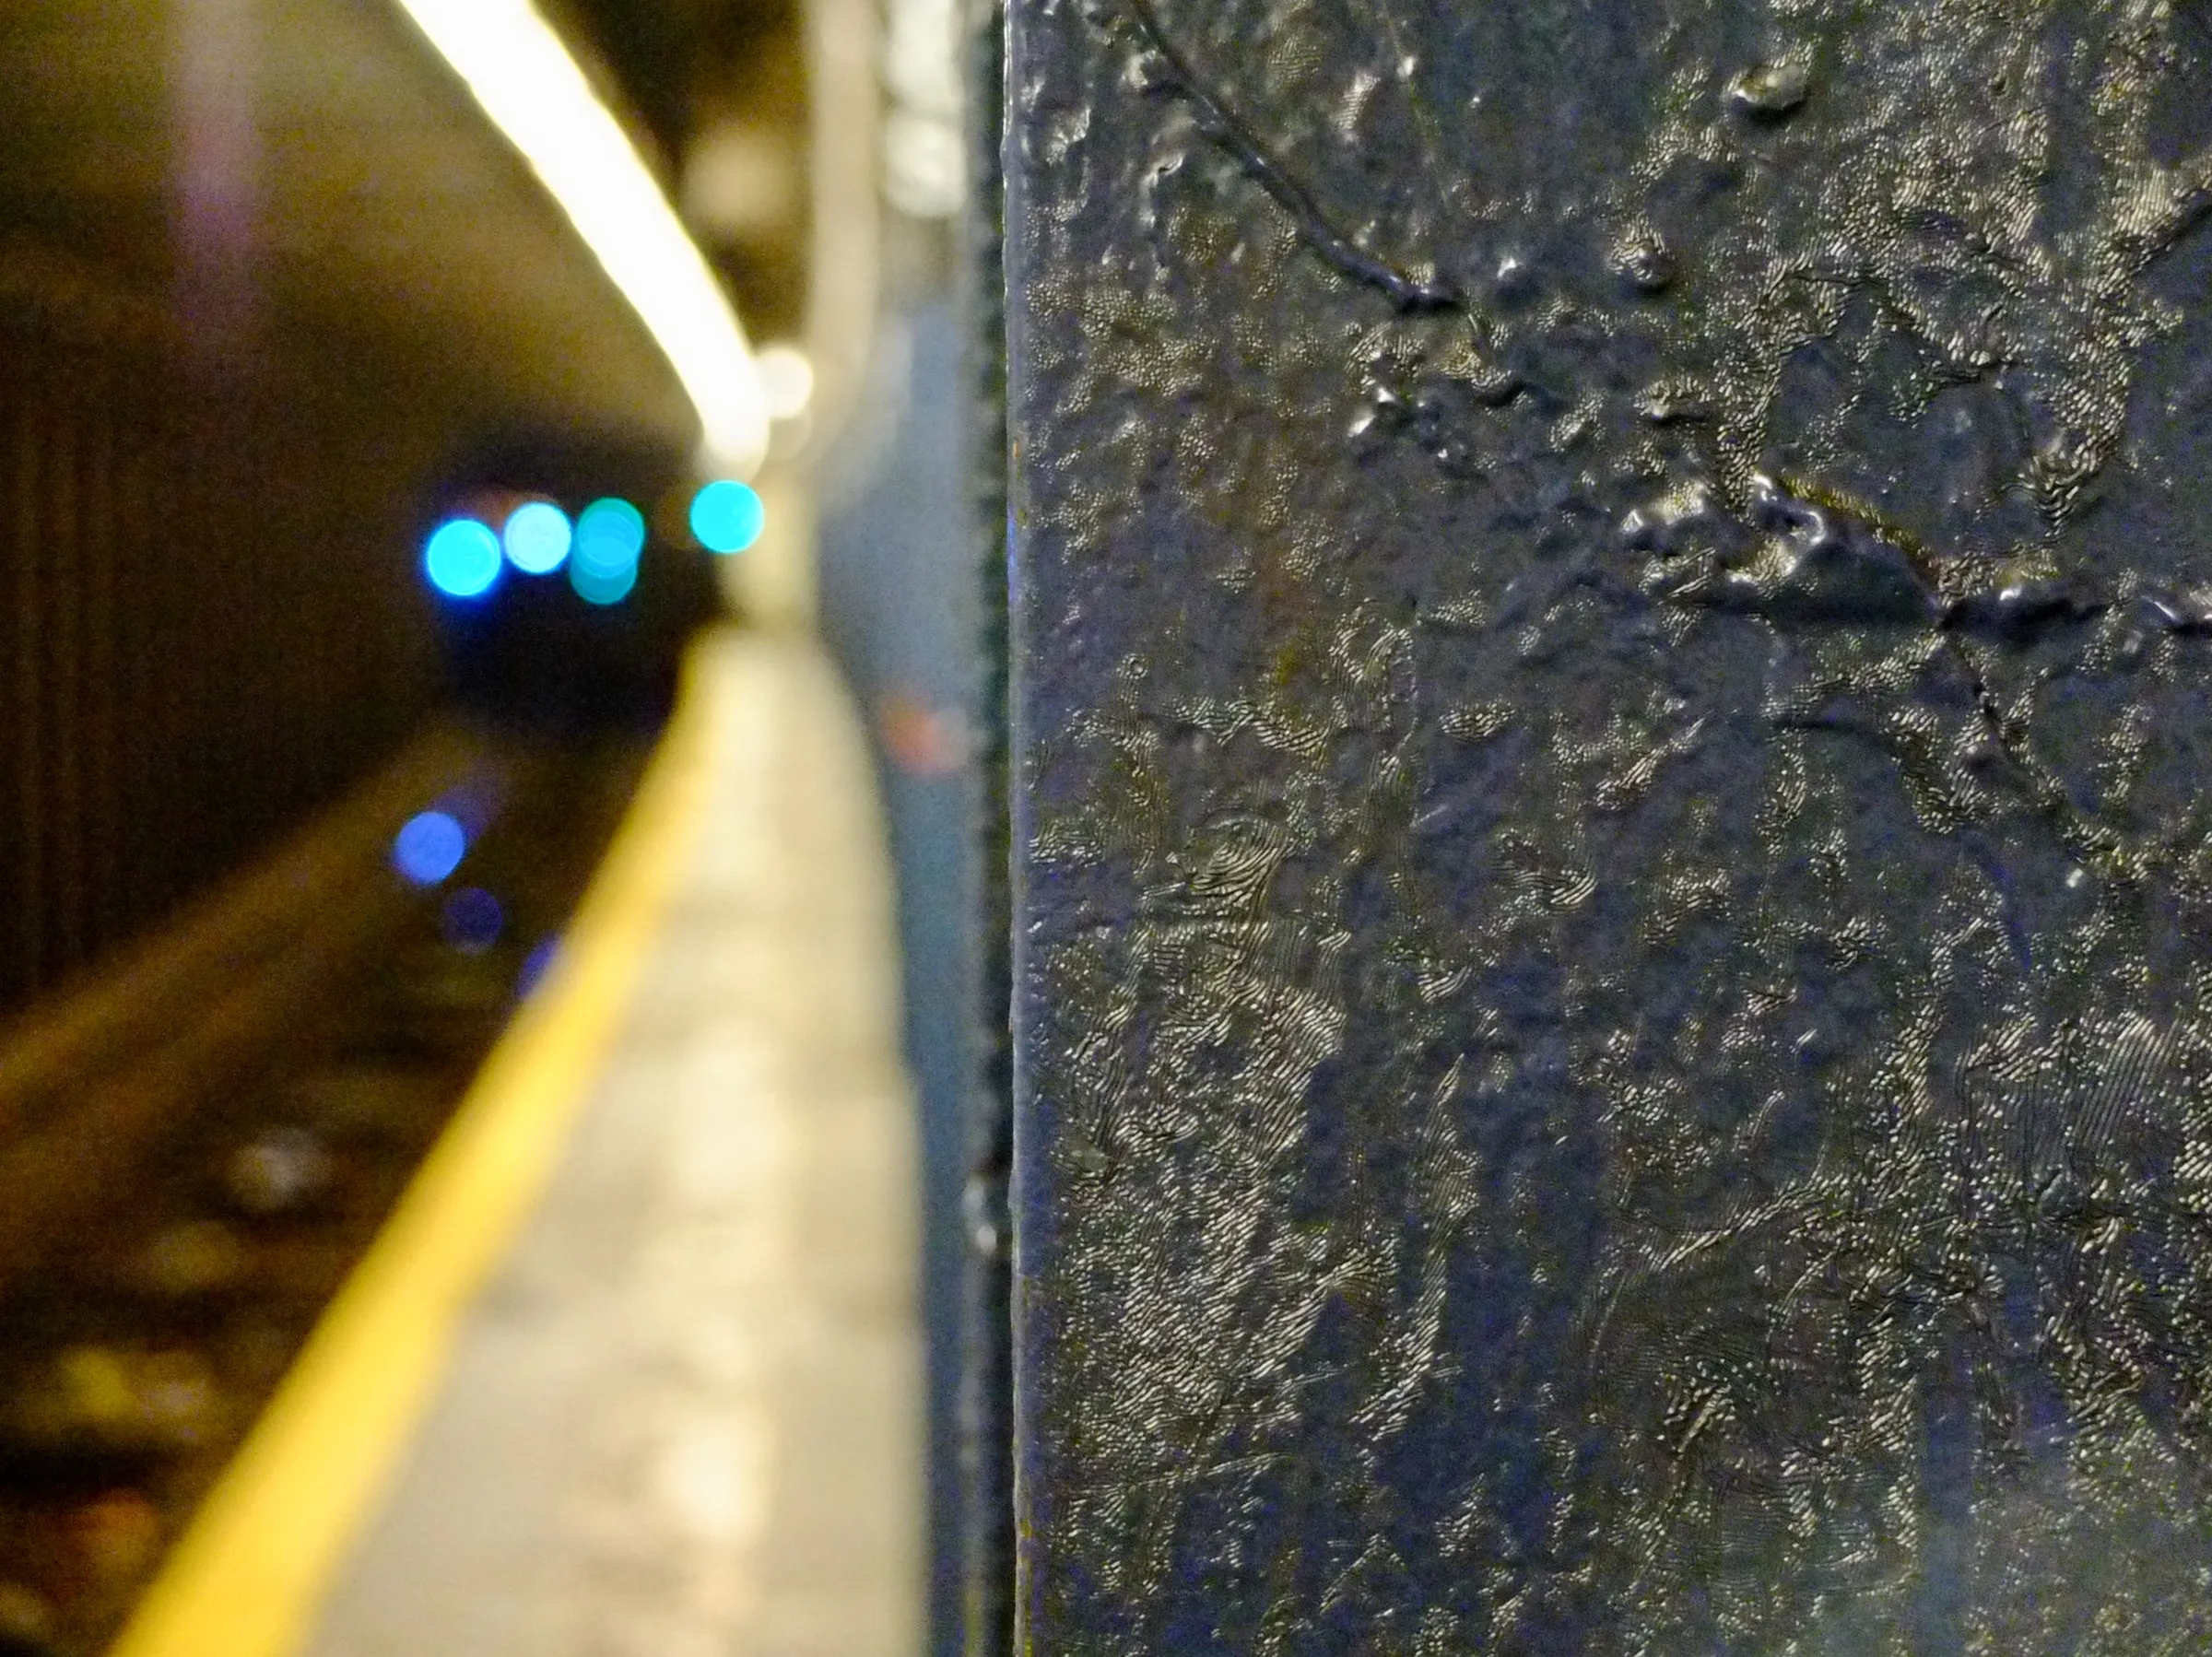 Blue paint caked onto vertical steel beams that support a subway platform, down the tunnel, lights from an out of focus train that approaches